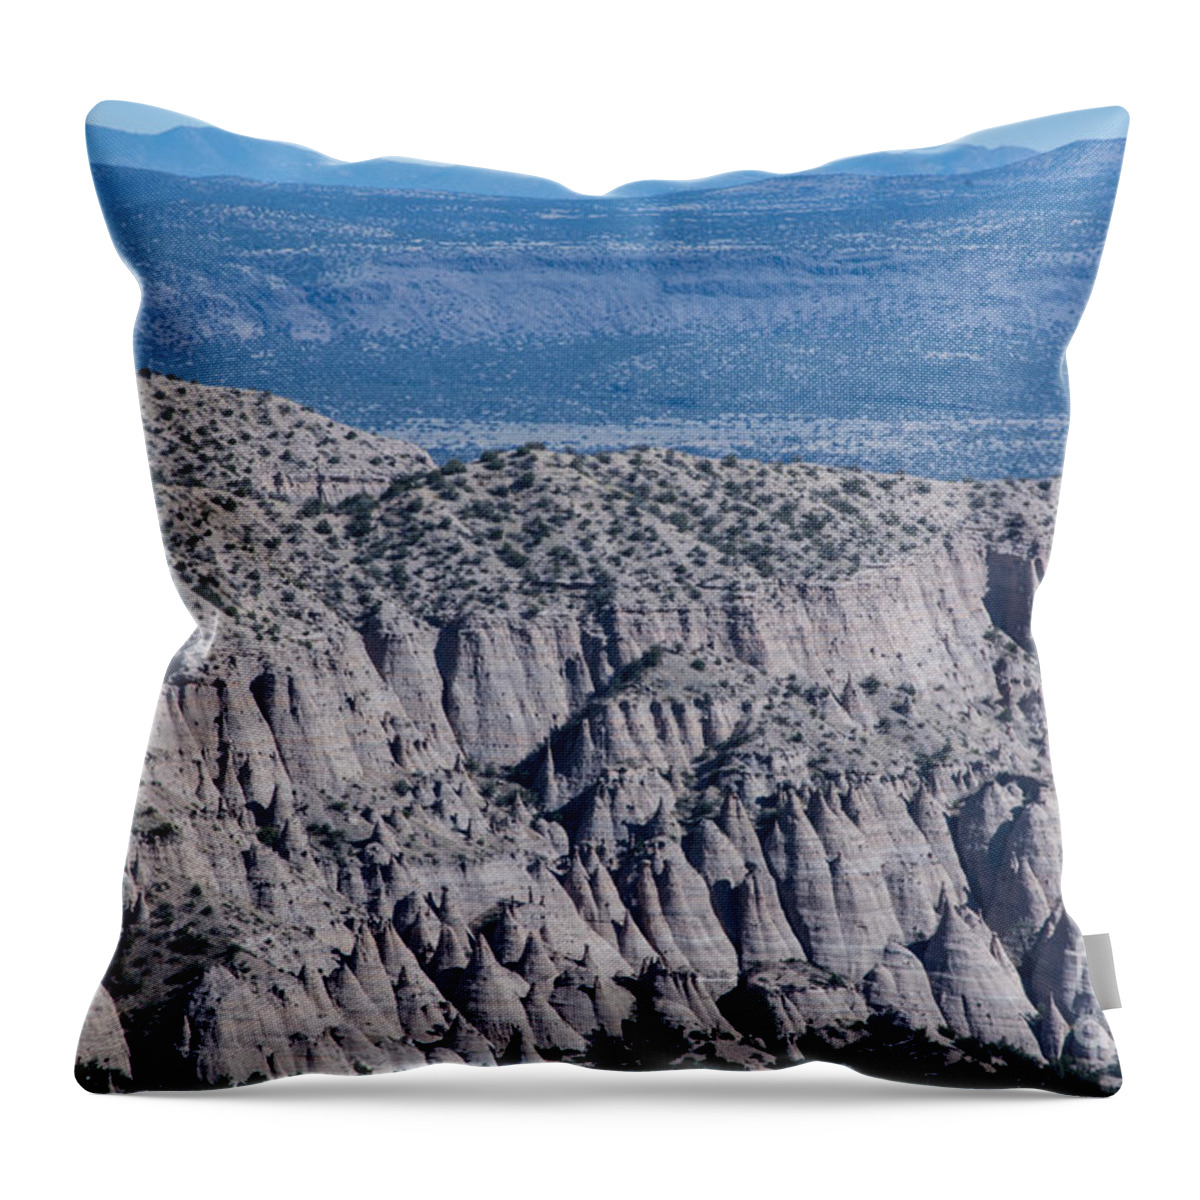 Tent Rocks Throw Pillow featuring the photograph Tent Rocks by John Greco